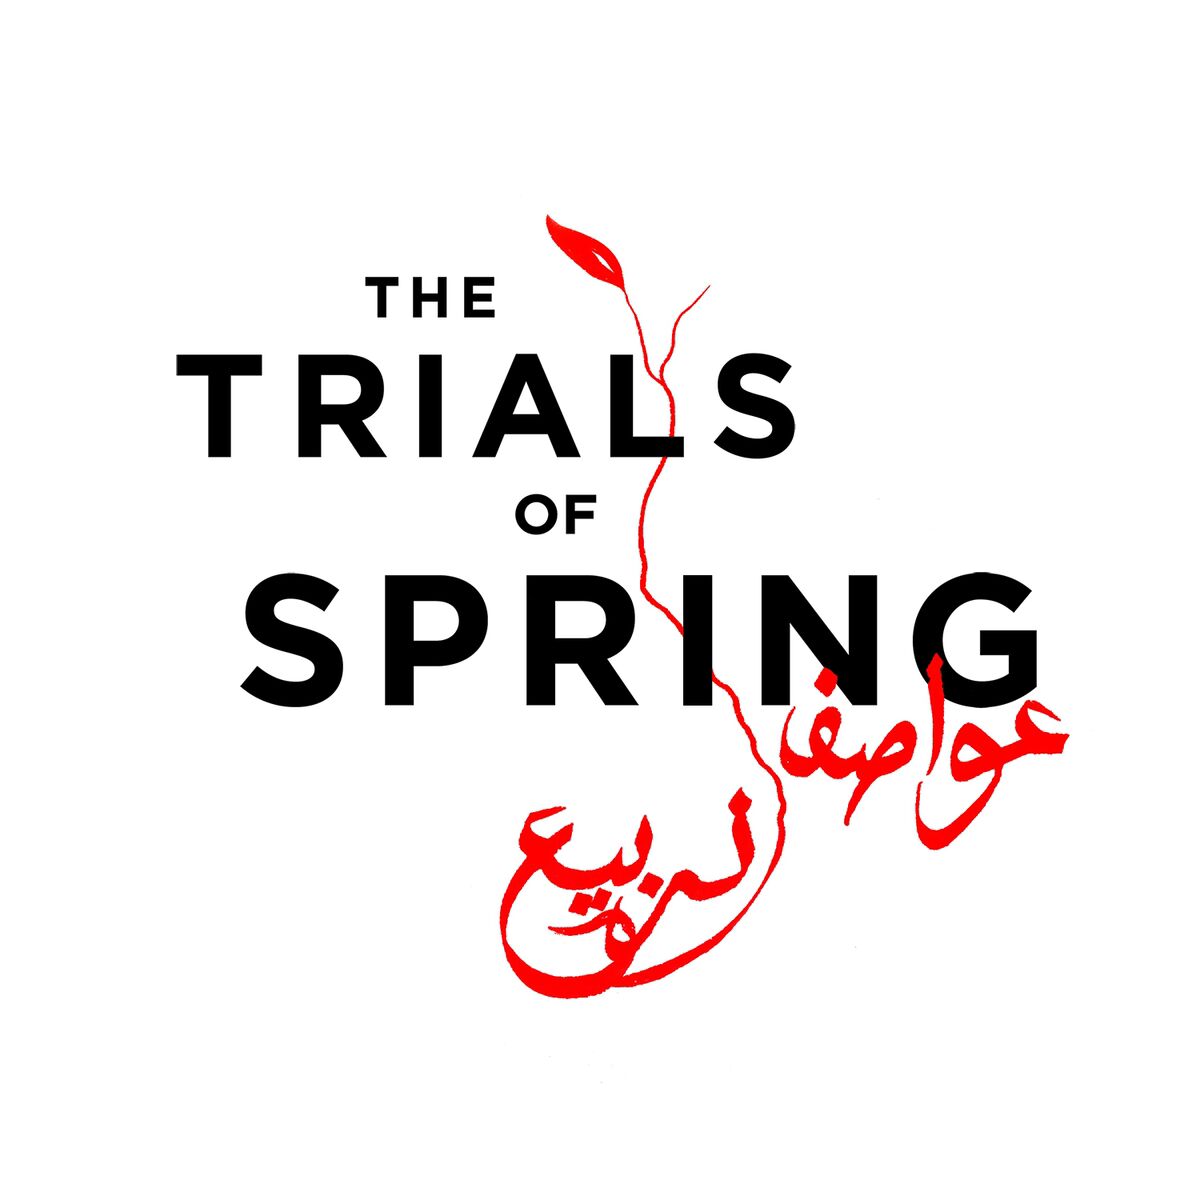 "The Trials of Spring" logo (photo: The Trials of Spring media room)